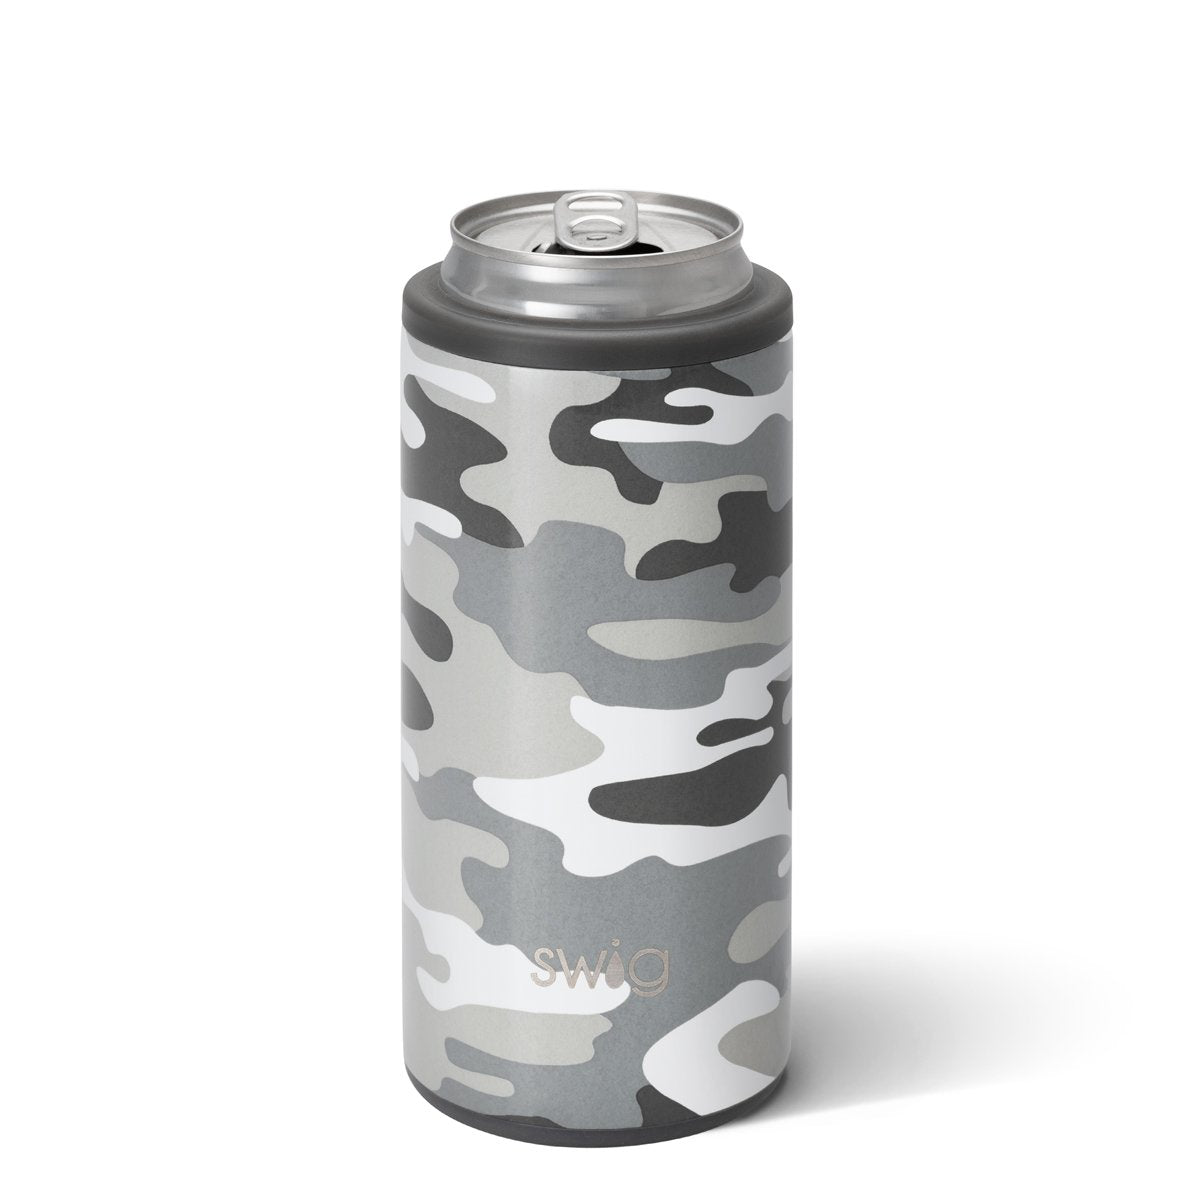 Swig Life Can Cooler 12 oz